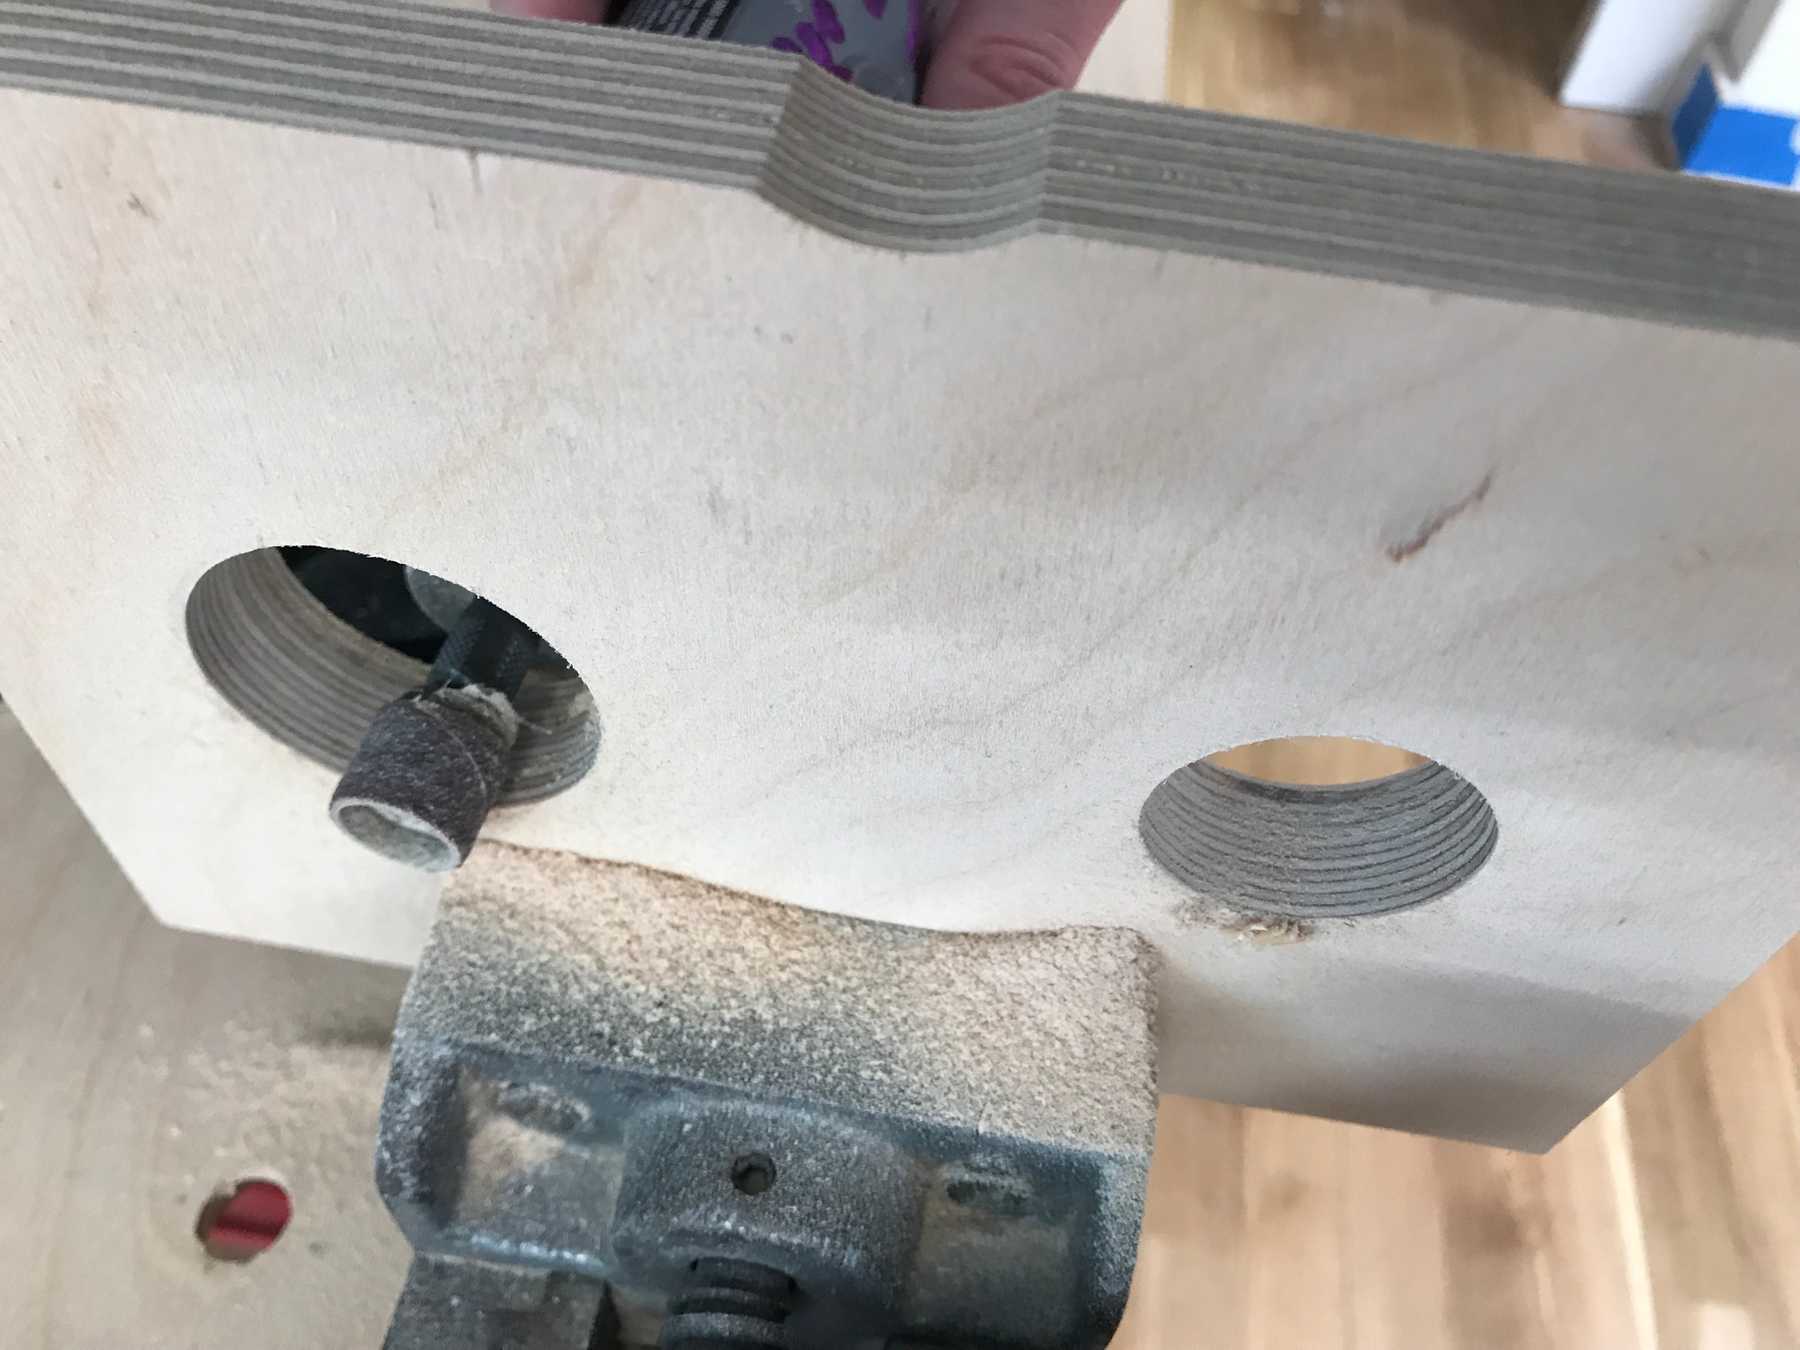 Using the dremel to widen the holes